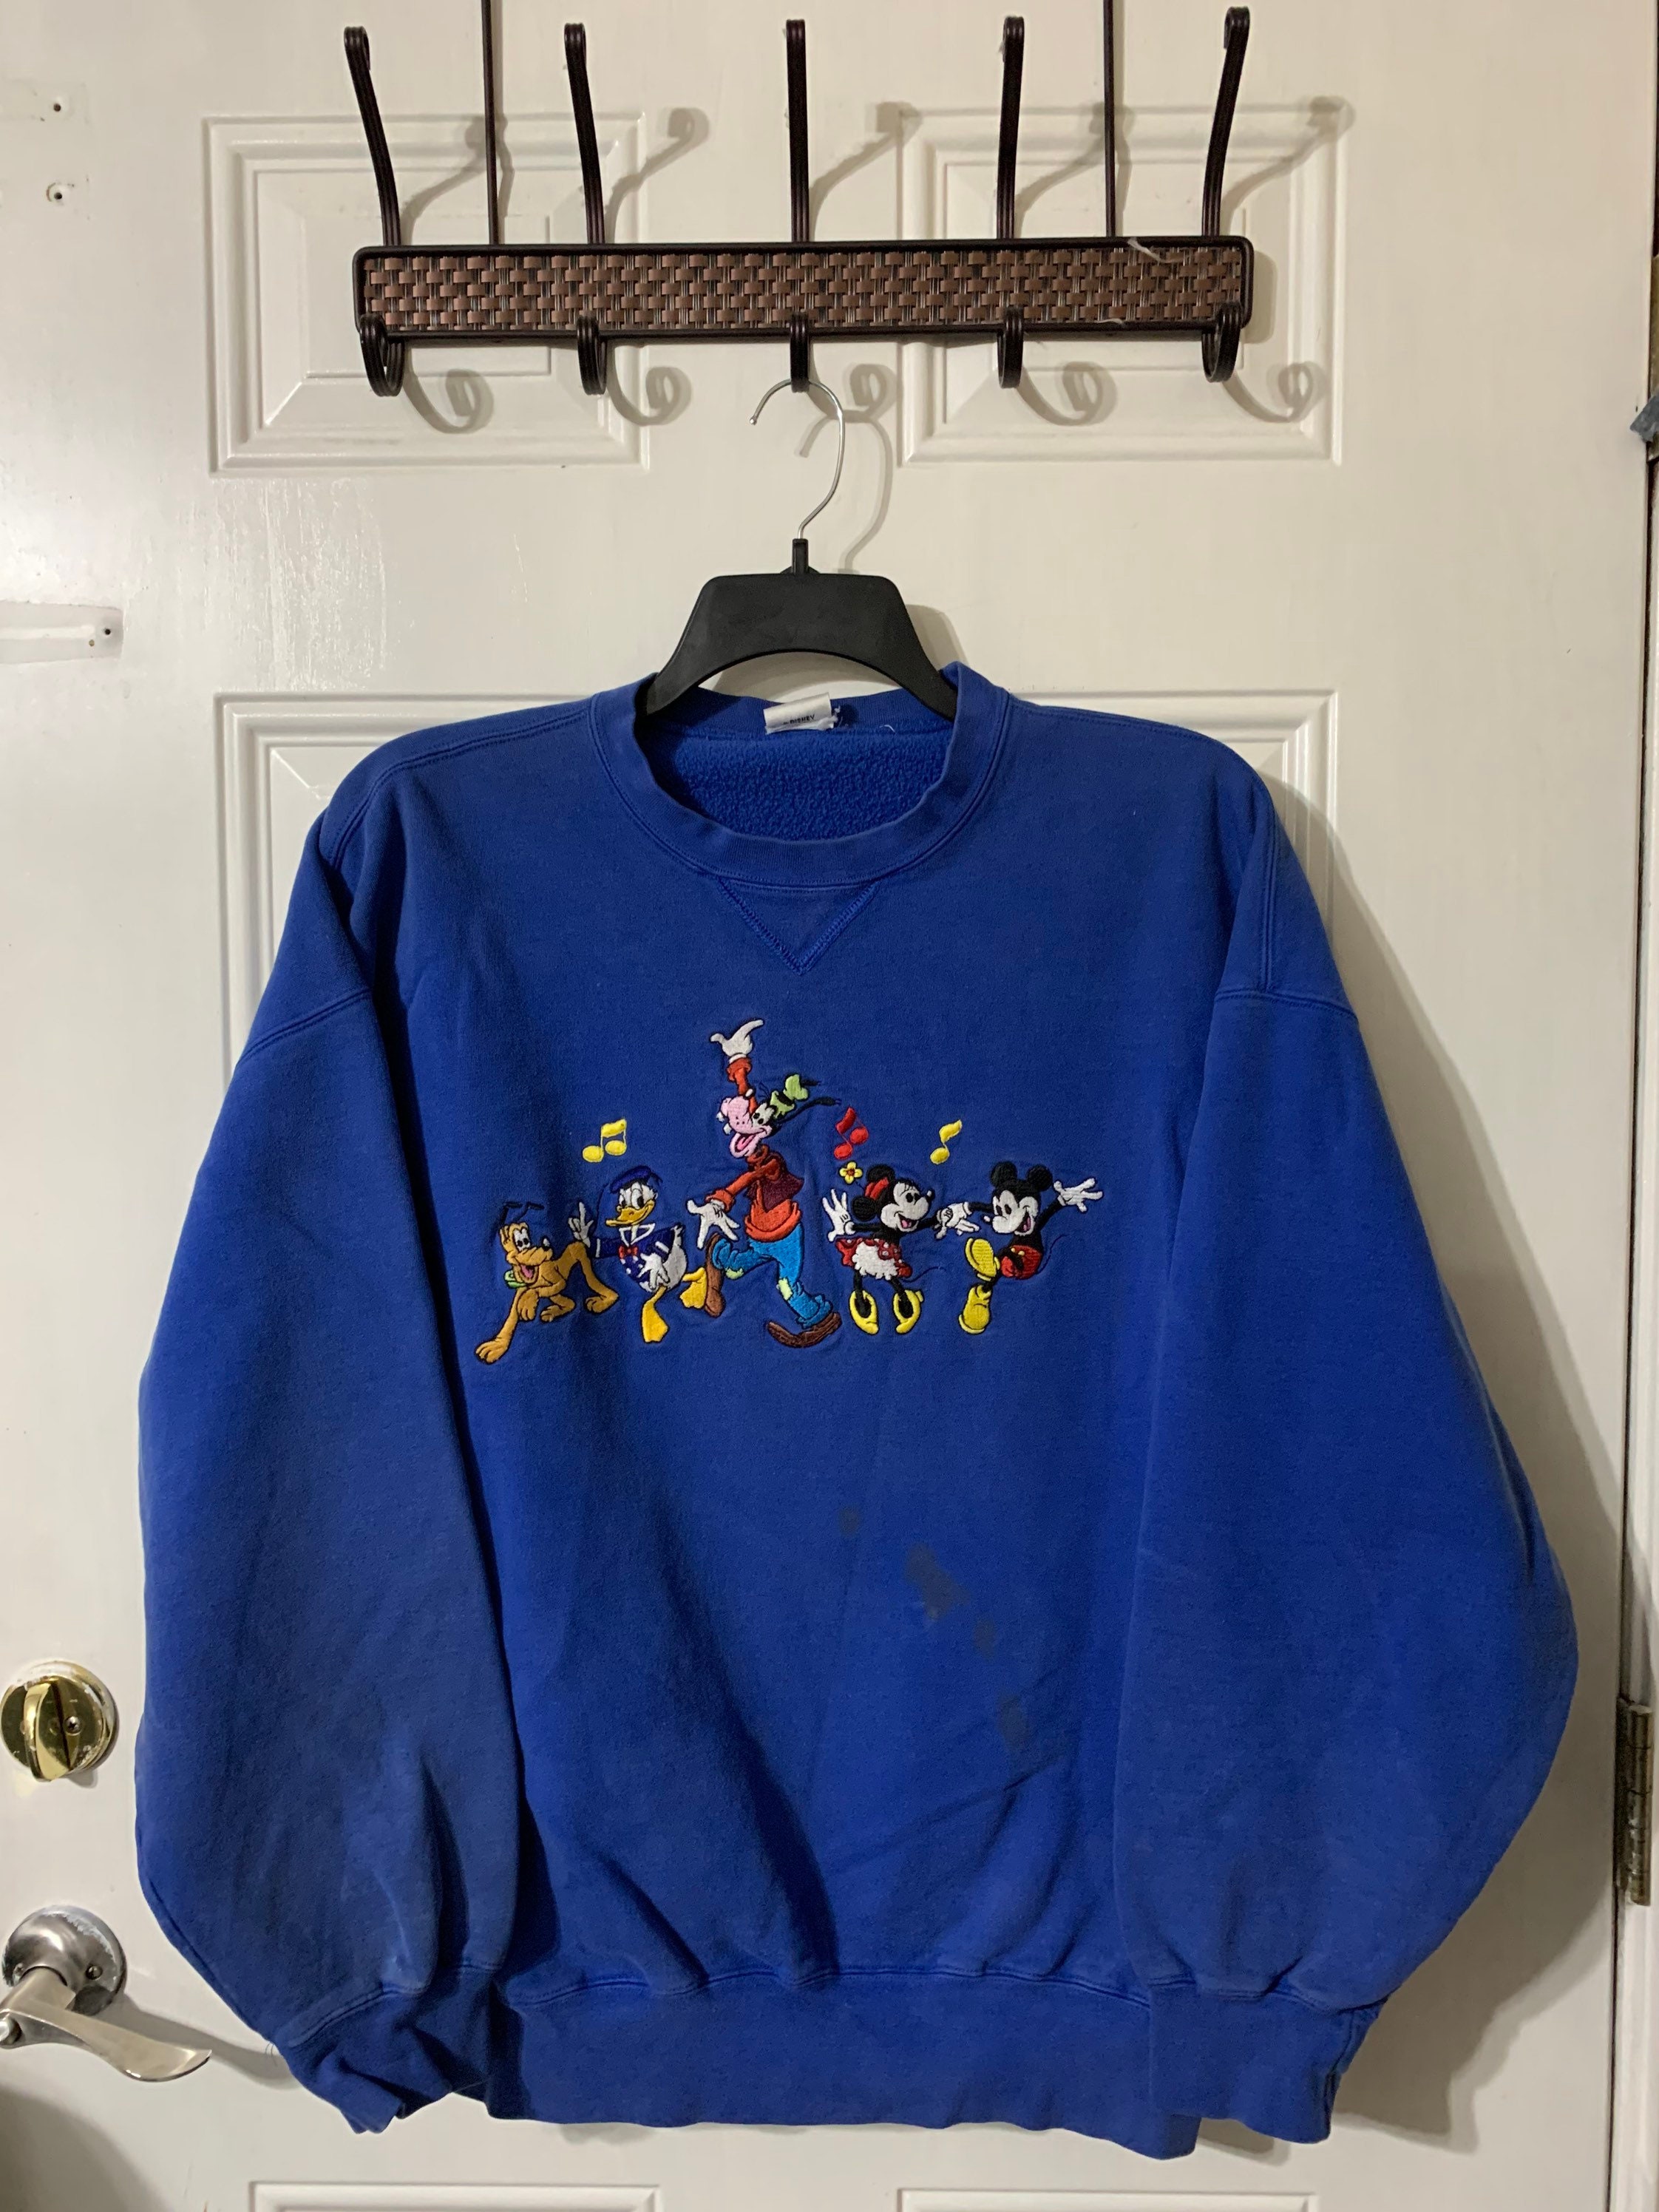 Vintage Mickey and friends sweatshirt size XL. | Etsy